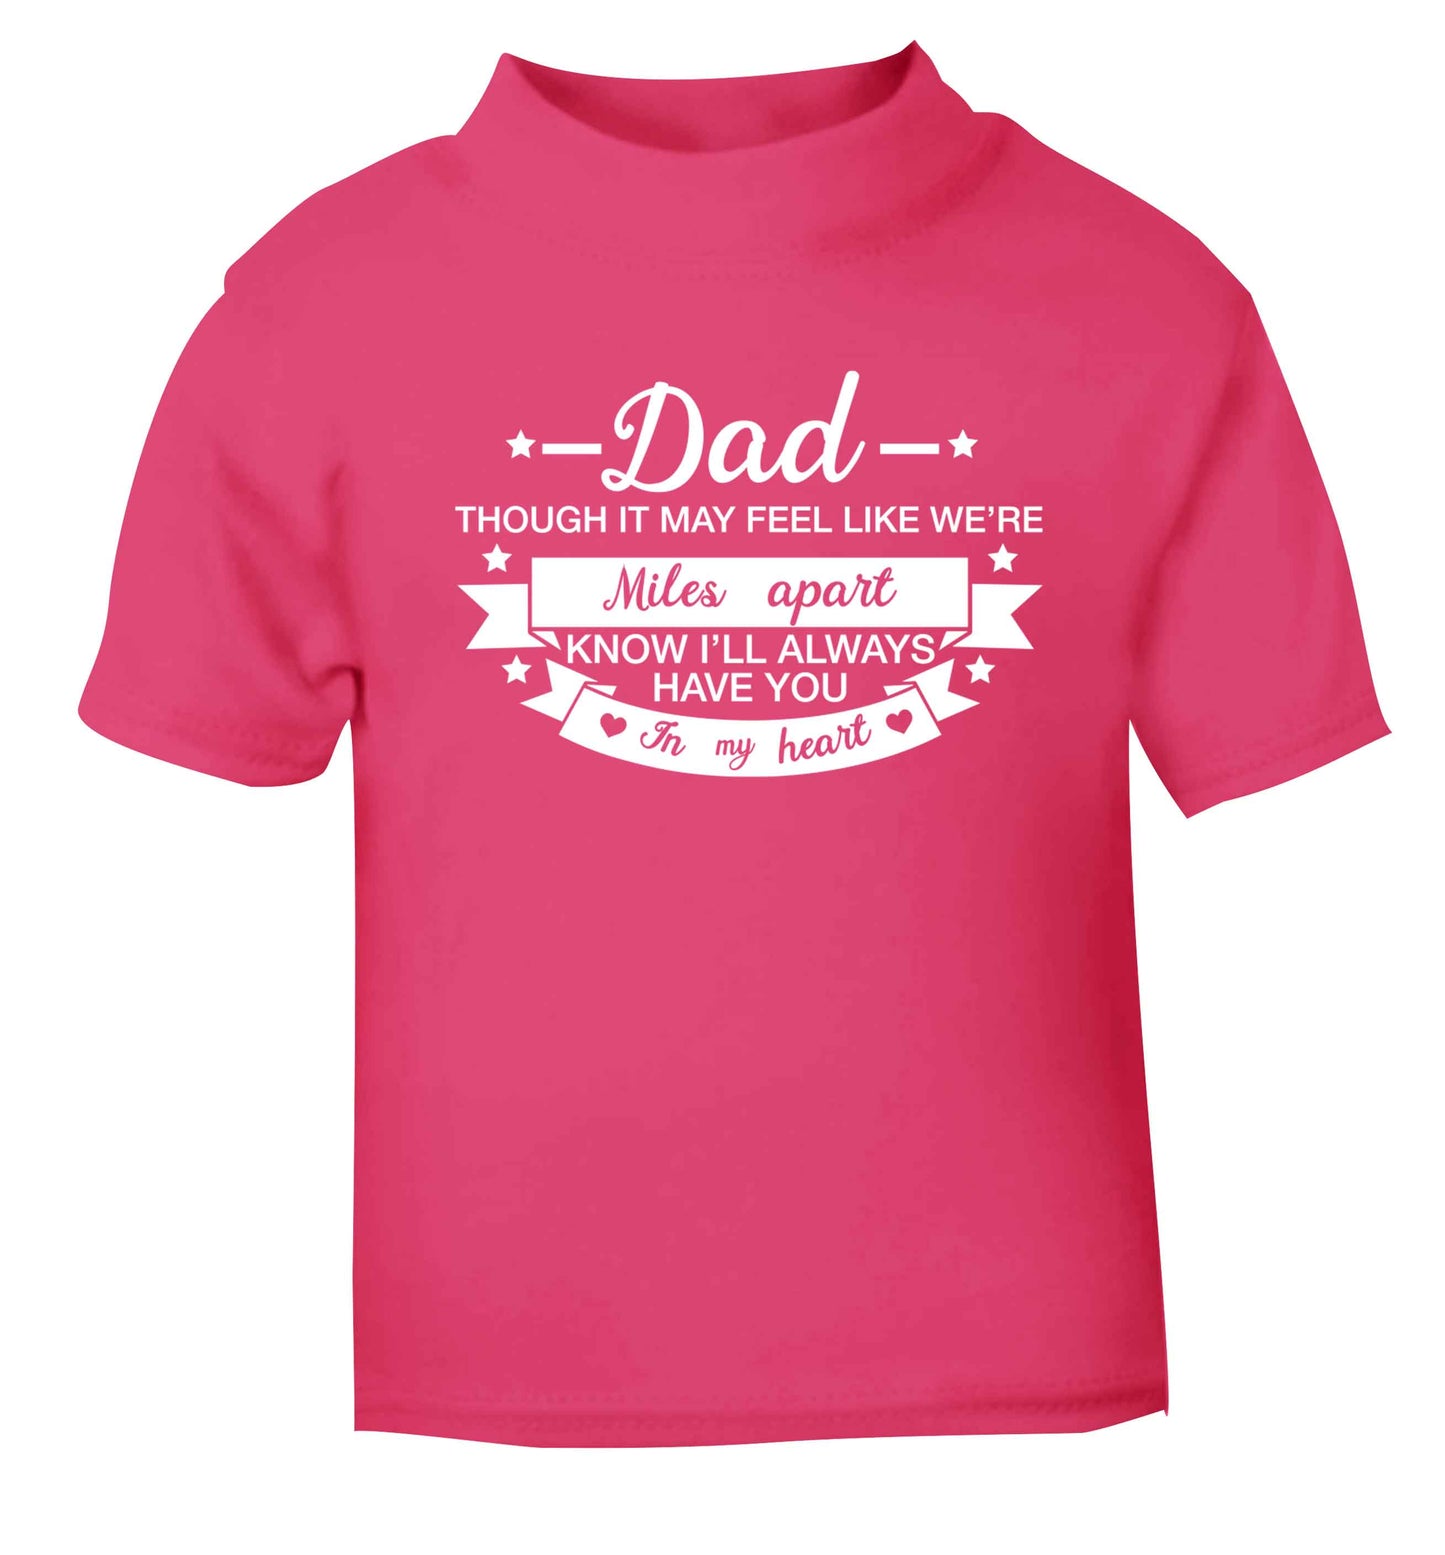 Dad though it may feel like we're miles apart know I'll always have you in my heart pink baby toddler Tshirt 2 Years